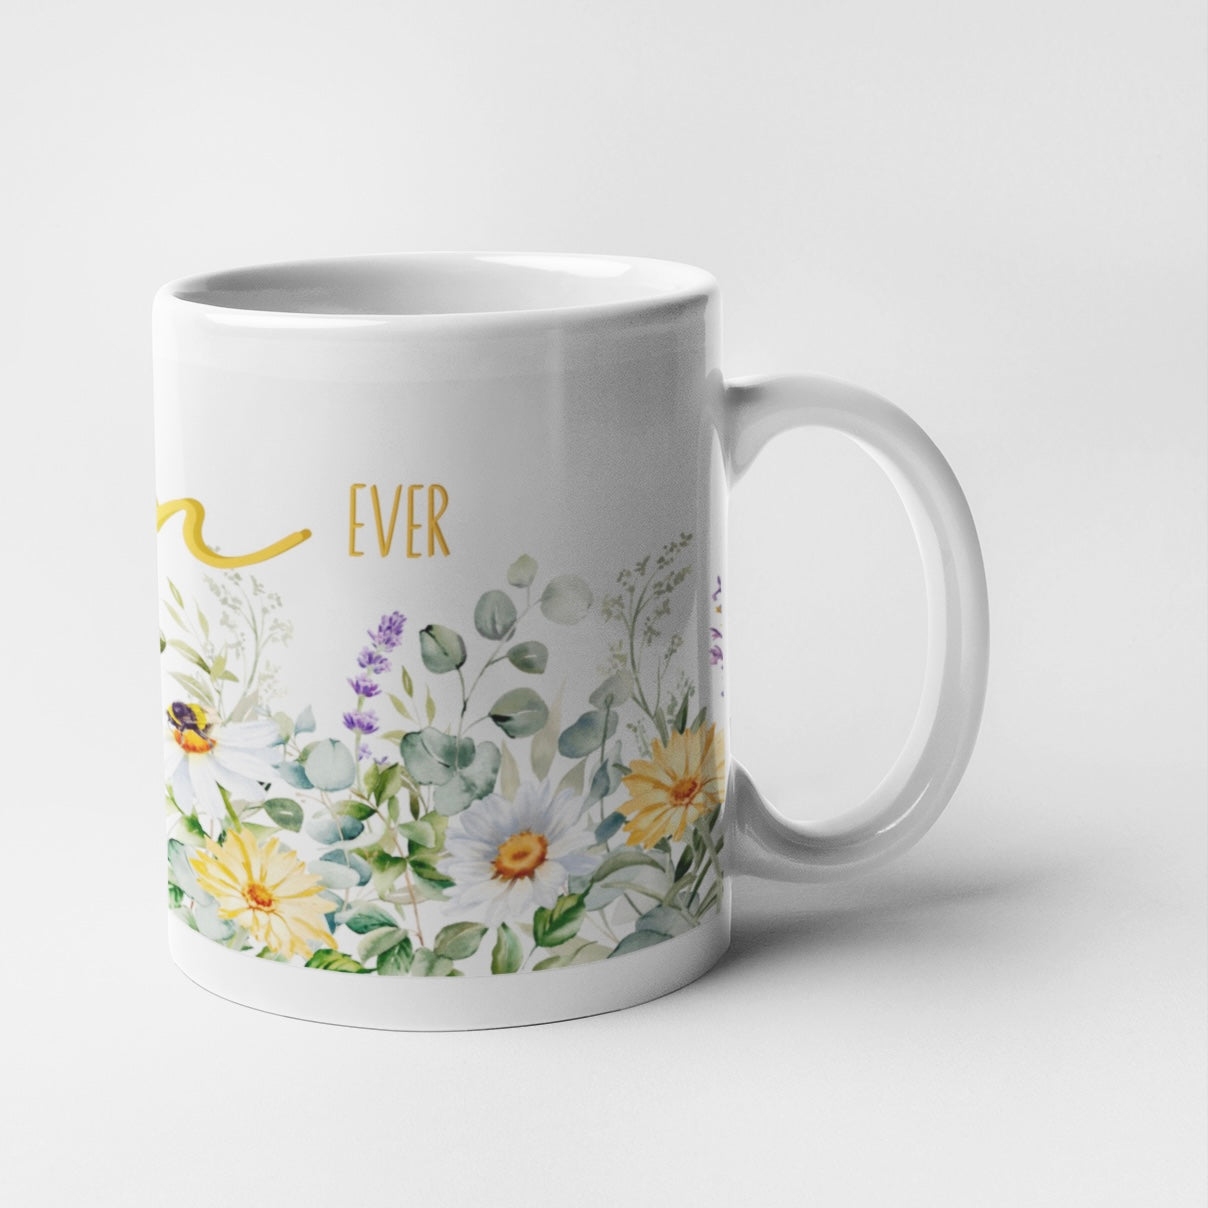 Best Nan Ever For Her Collection Art Personalised Ceramic Mug Gift Idea